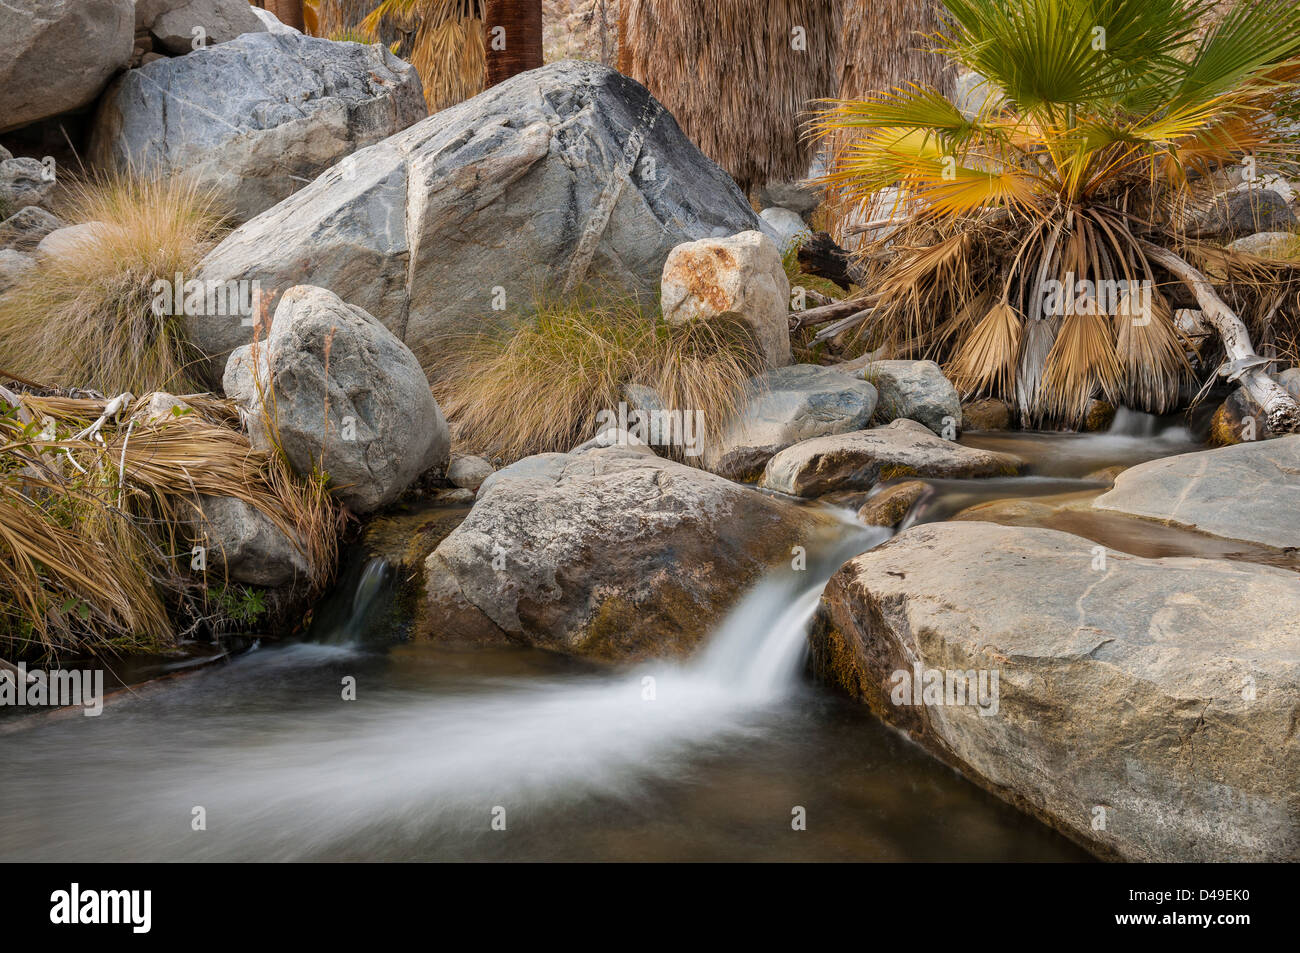 Creek in Andreas Canyon, one of the Indian Canyons on the Agua Caliente Indian Reservation near Palm Springs, California. Stock Photo